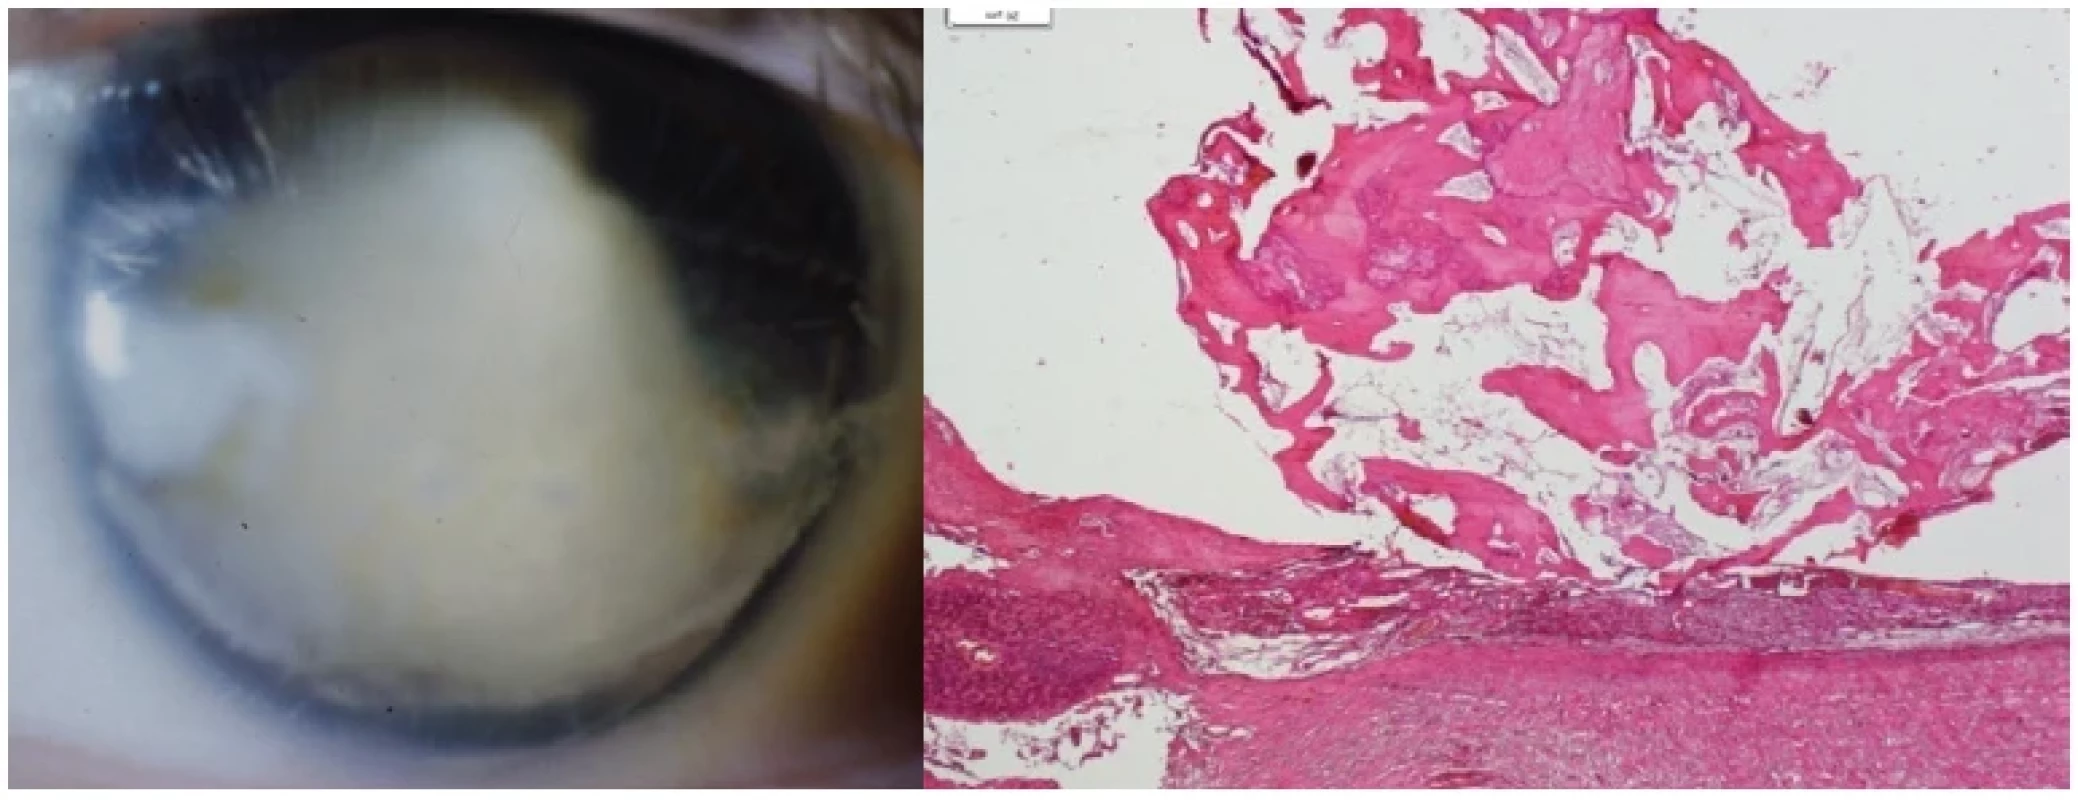 Left: Phthysis of bulbus after toxocara inflammation
Right: Ossified cyst after tapeworm in the choroid, HE, magnification 20x
